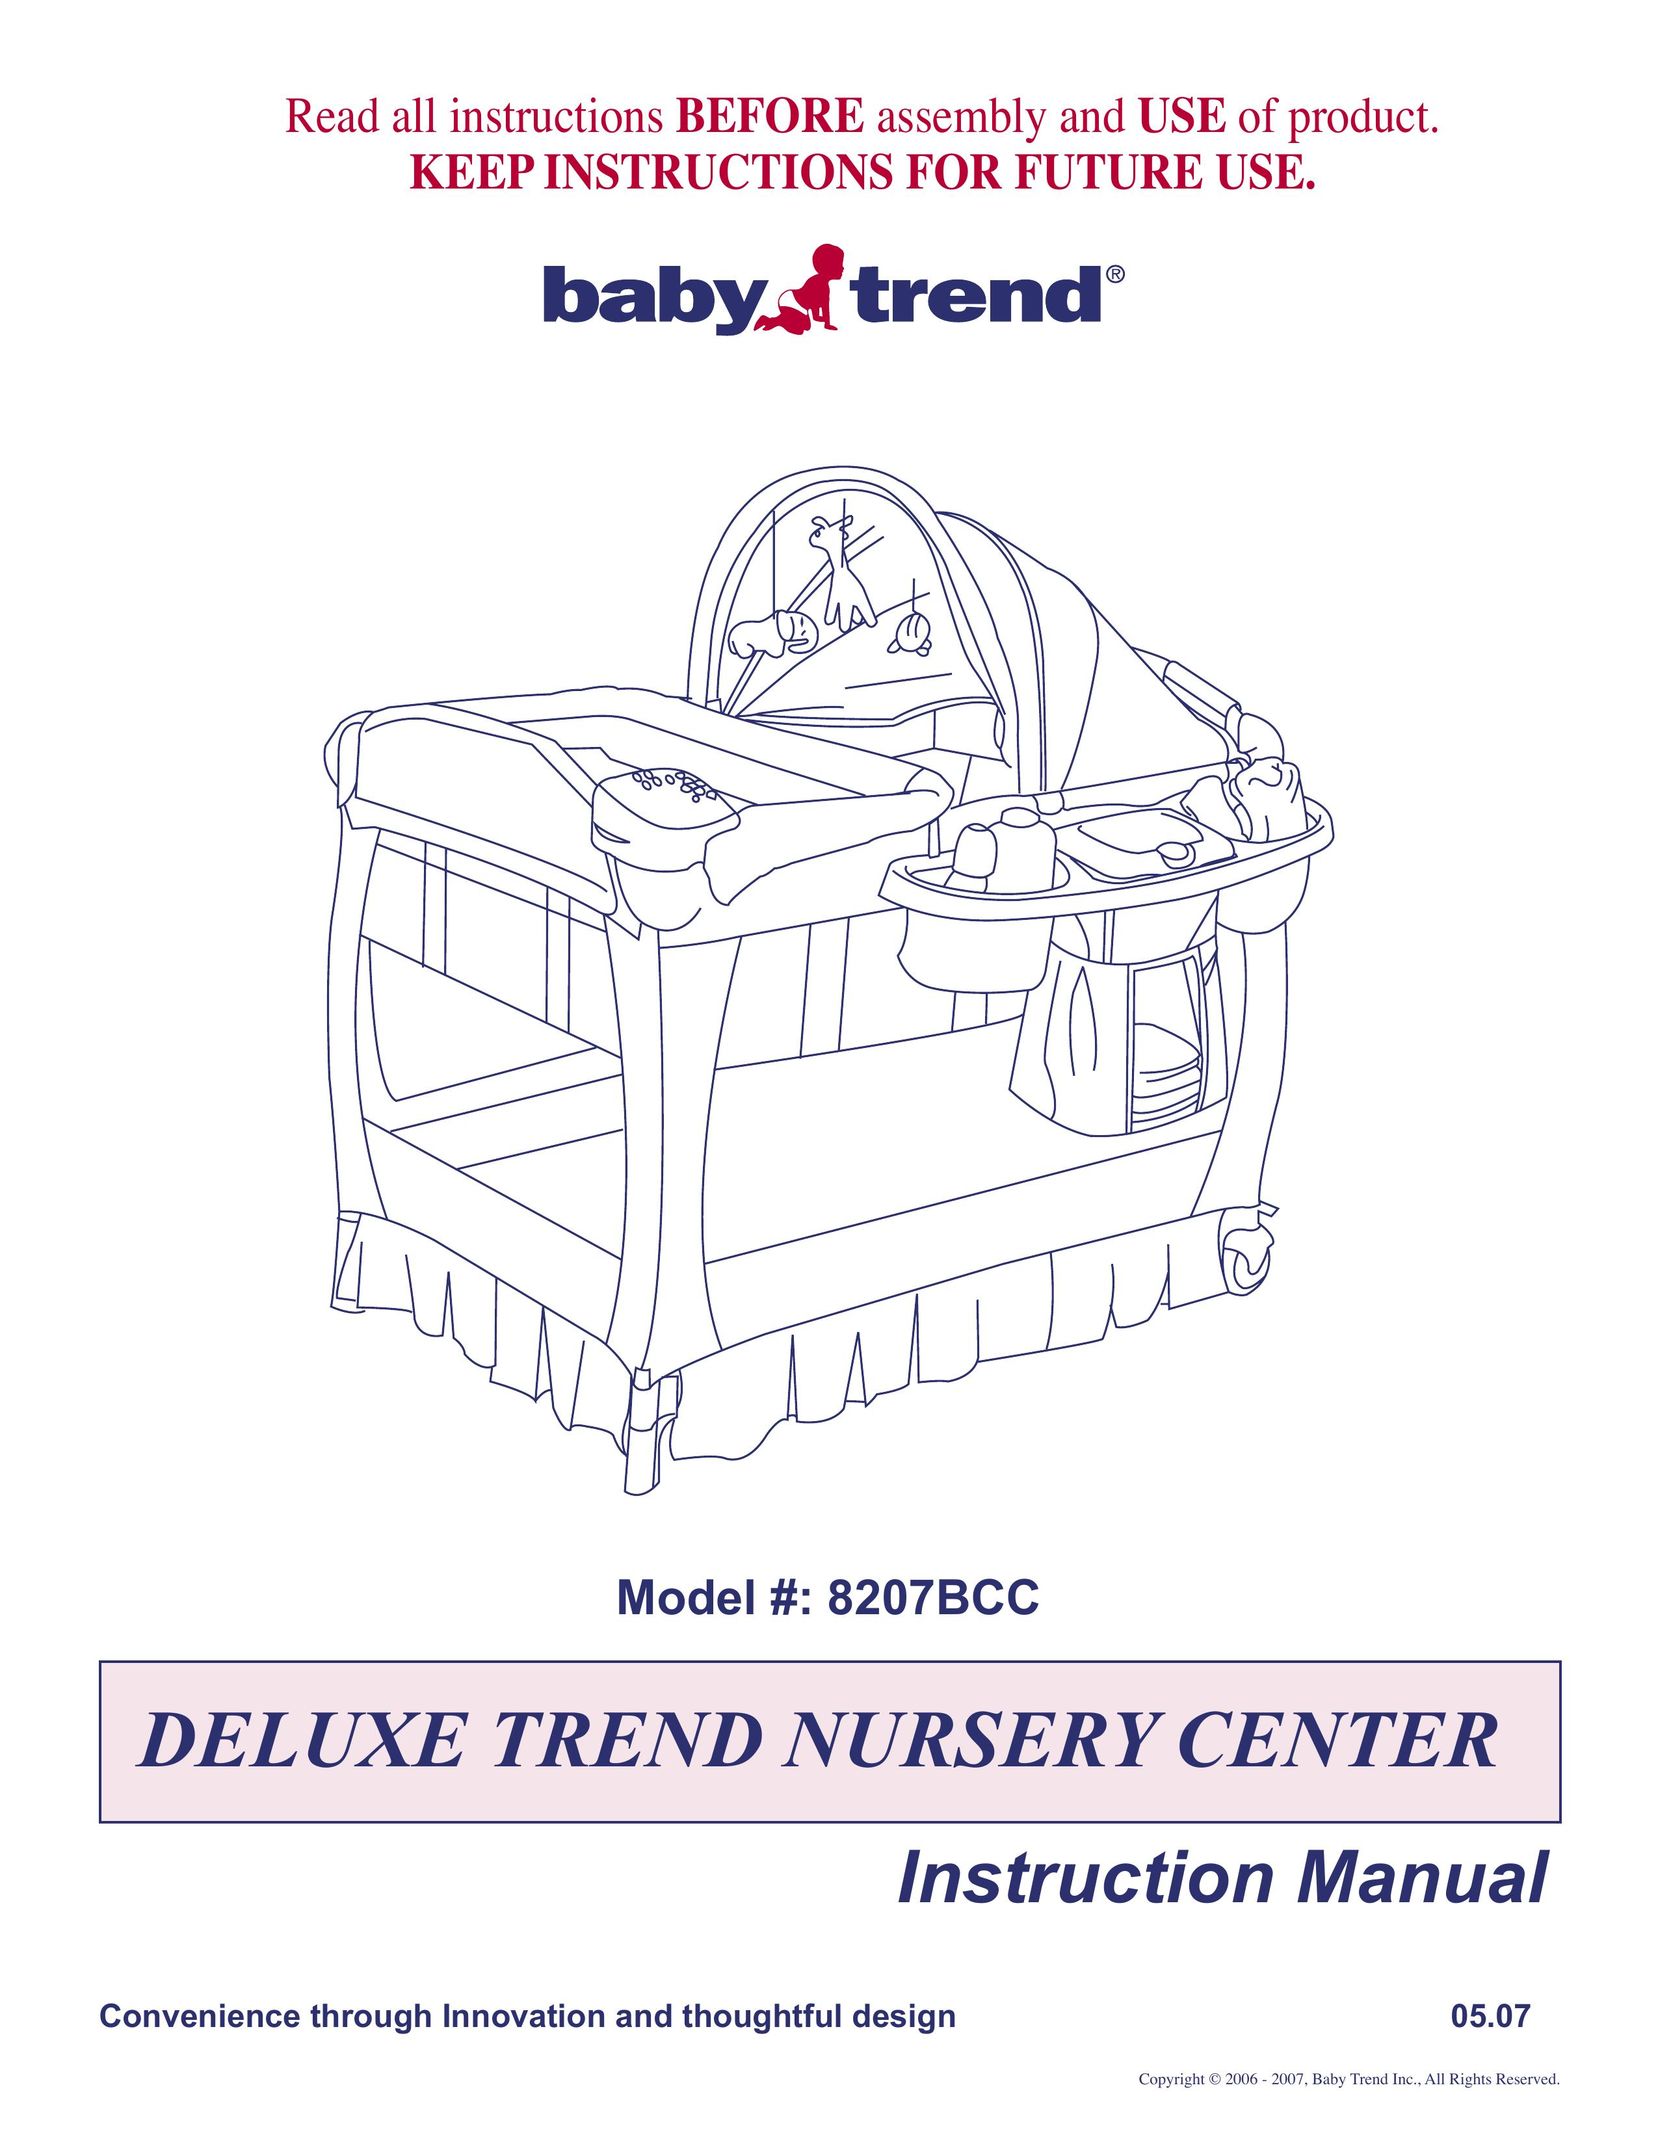 Baby Trend 8207BCC Baby Furniture User Manual